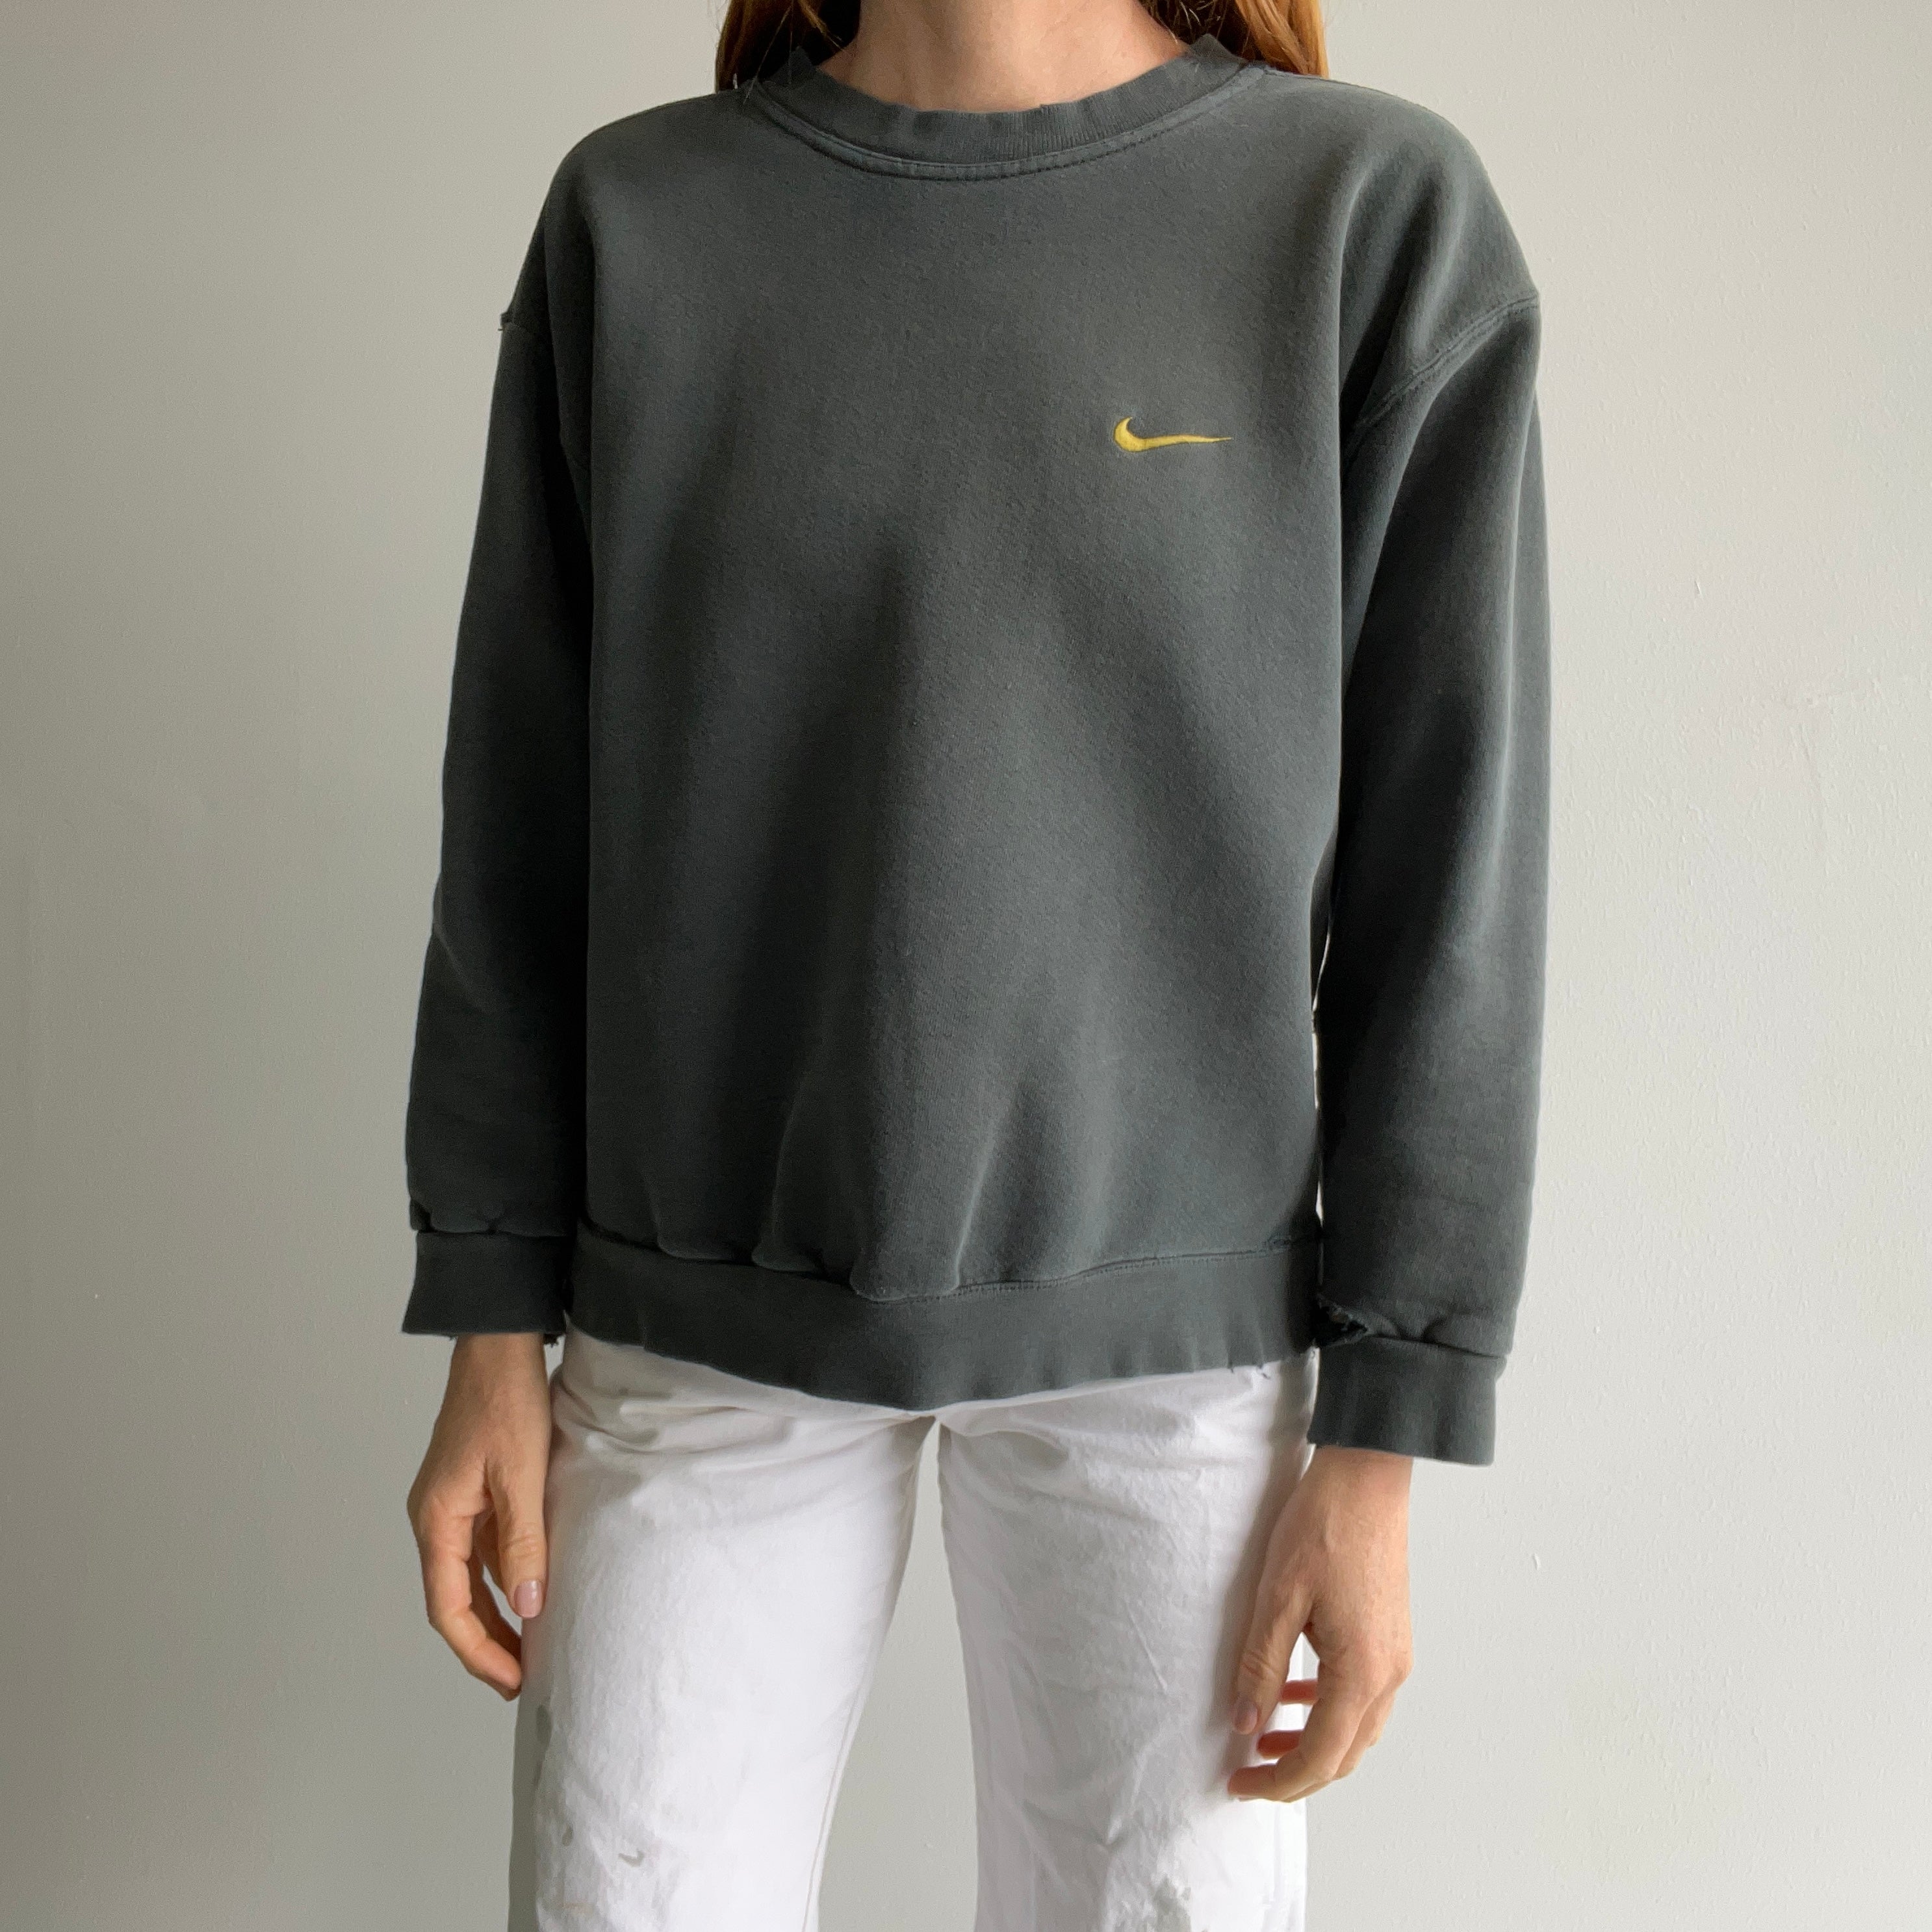 1990s Tattered Torn and Worn Faded Green Destroyed Nike Sweatshirt